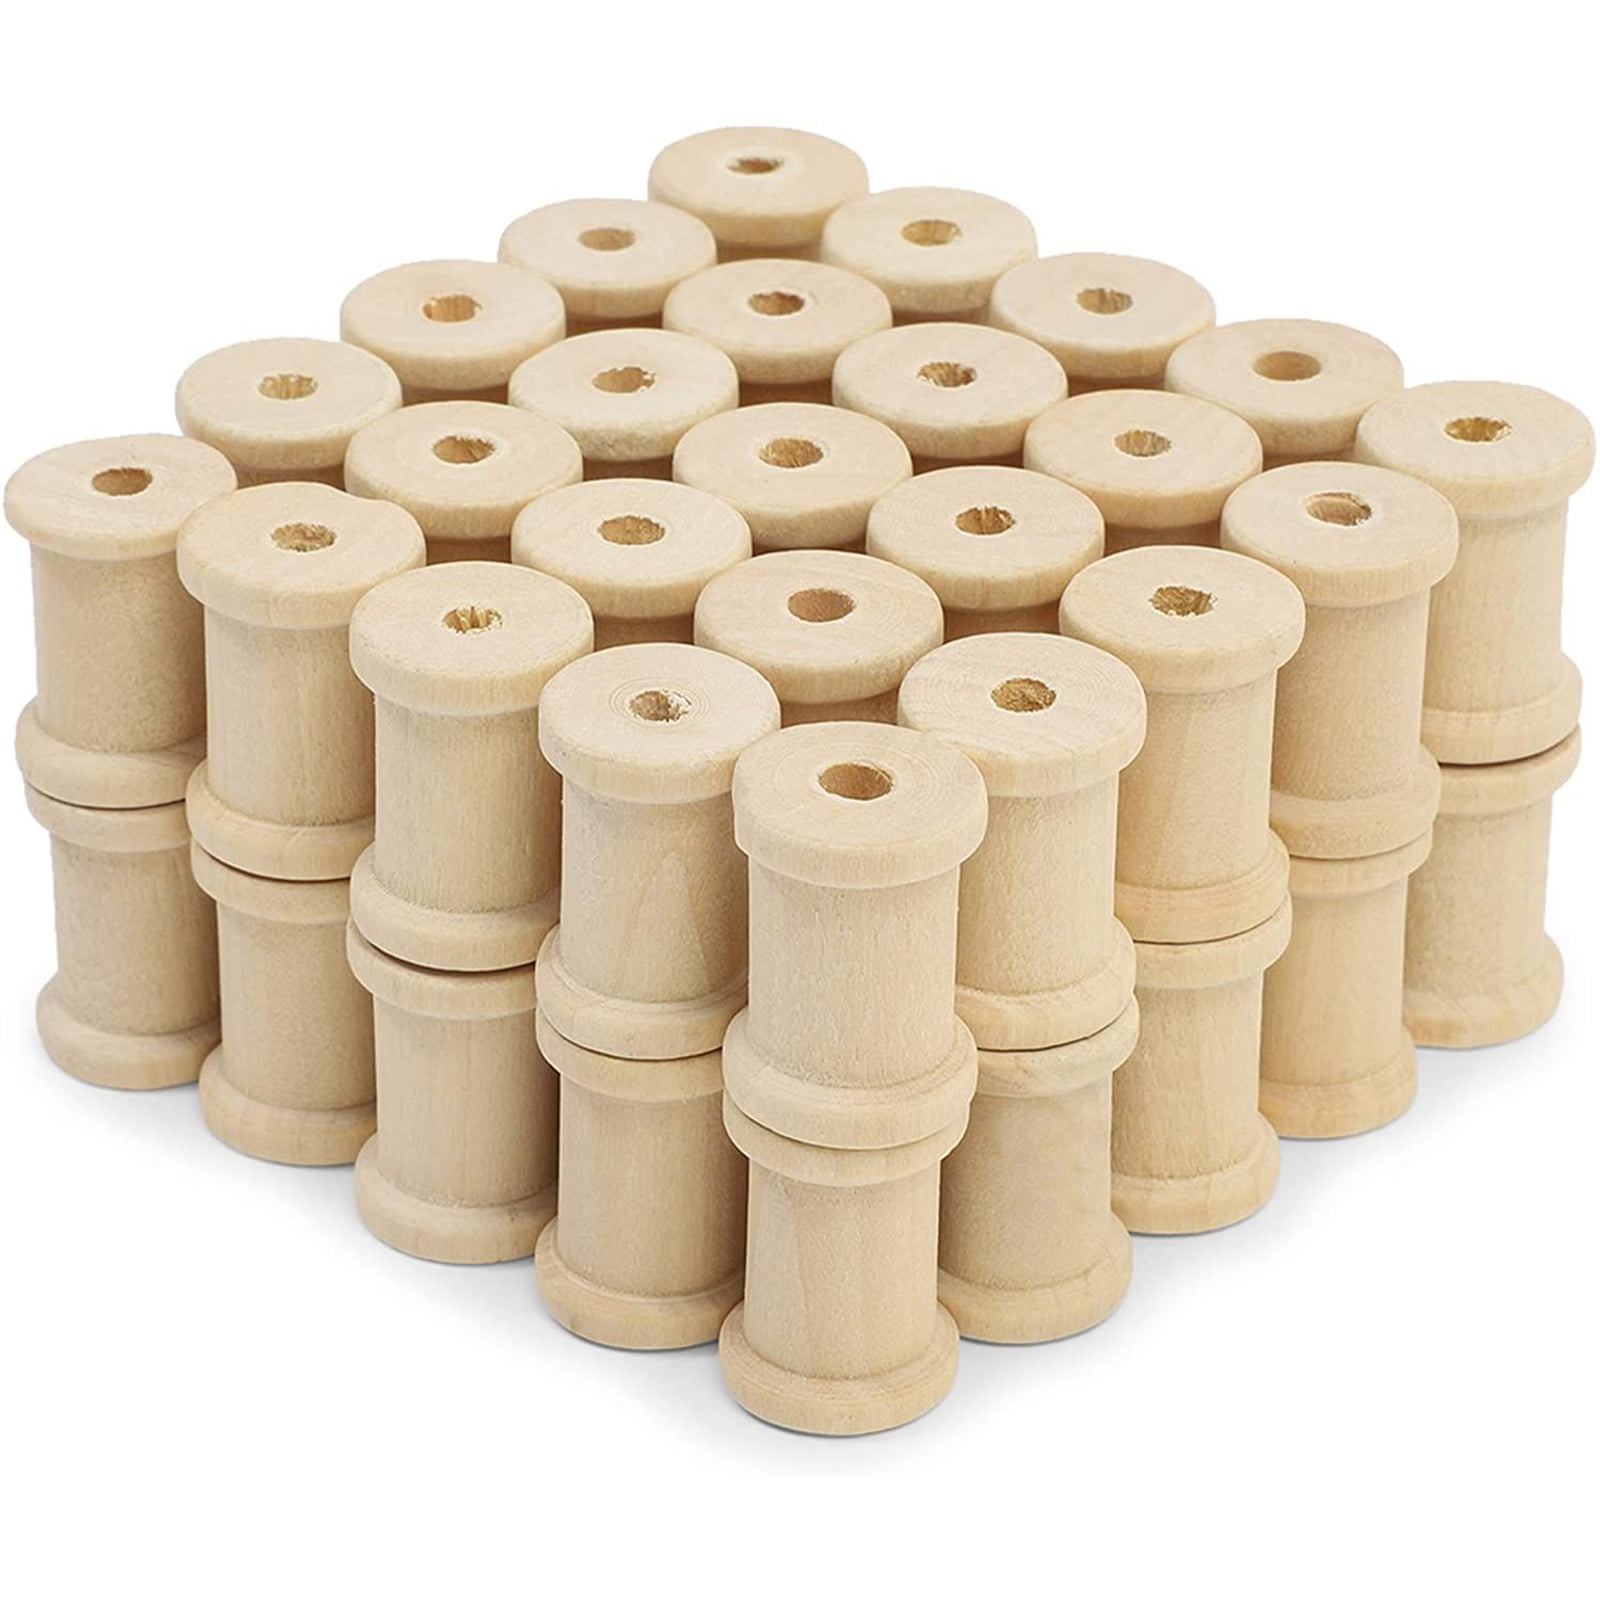 Unfinished Thread Wire Sewing Cord 50 Pack 1 1/8" x 3/4" Inch Wood Spools 